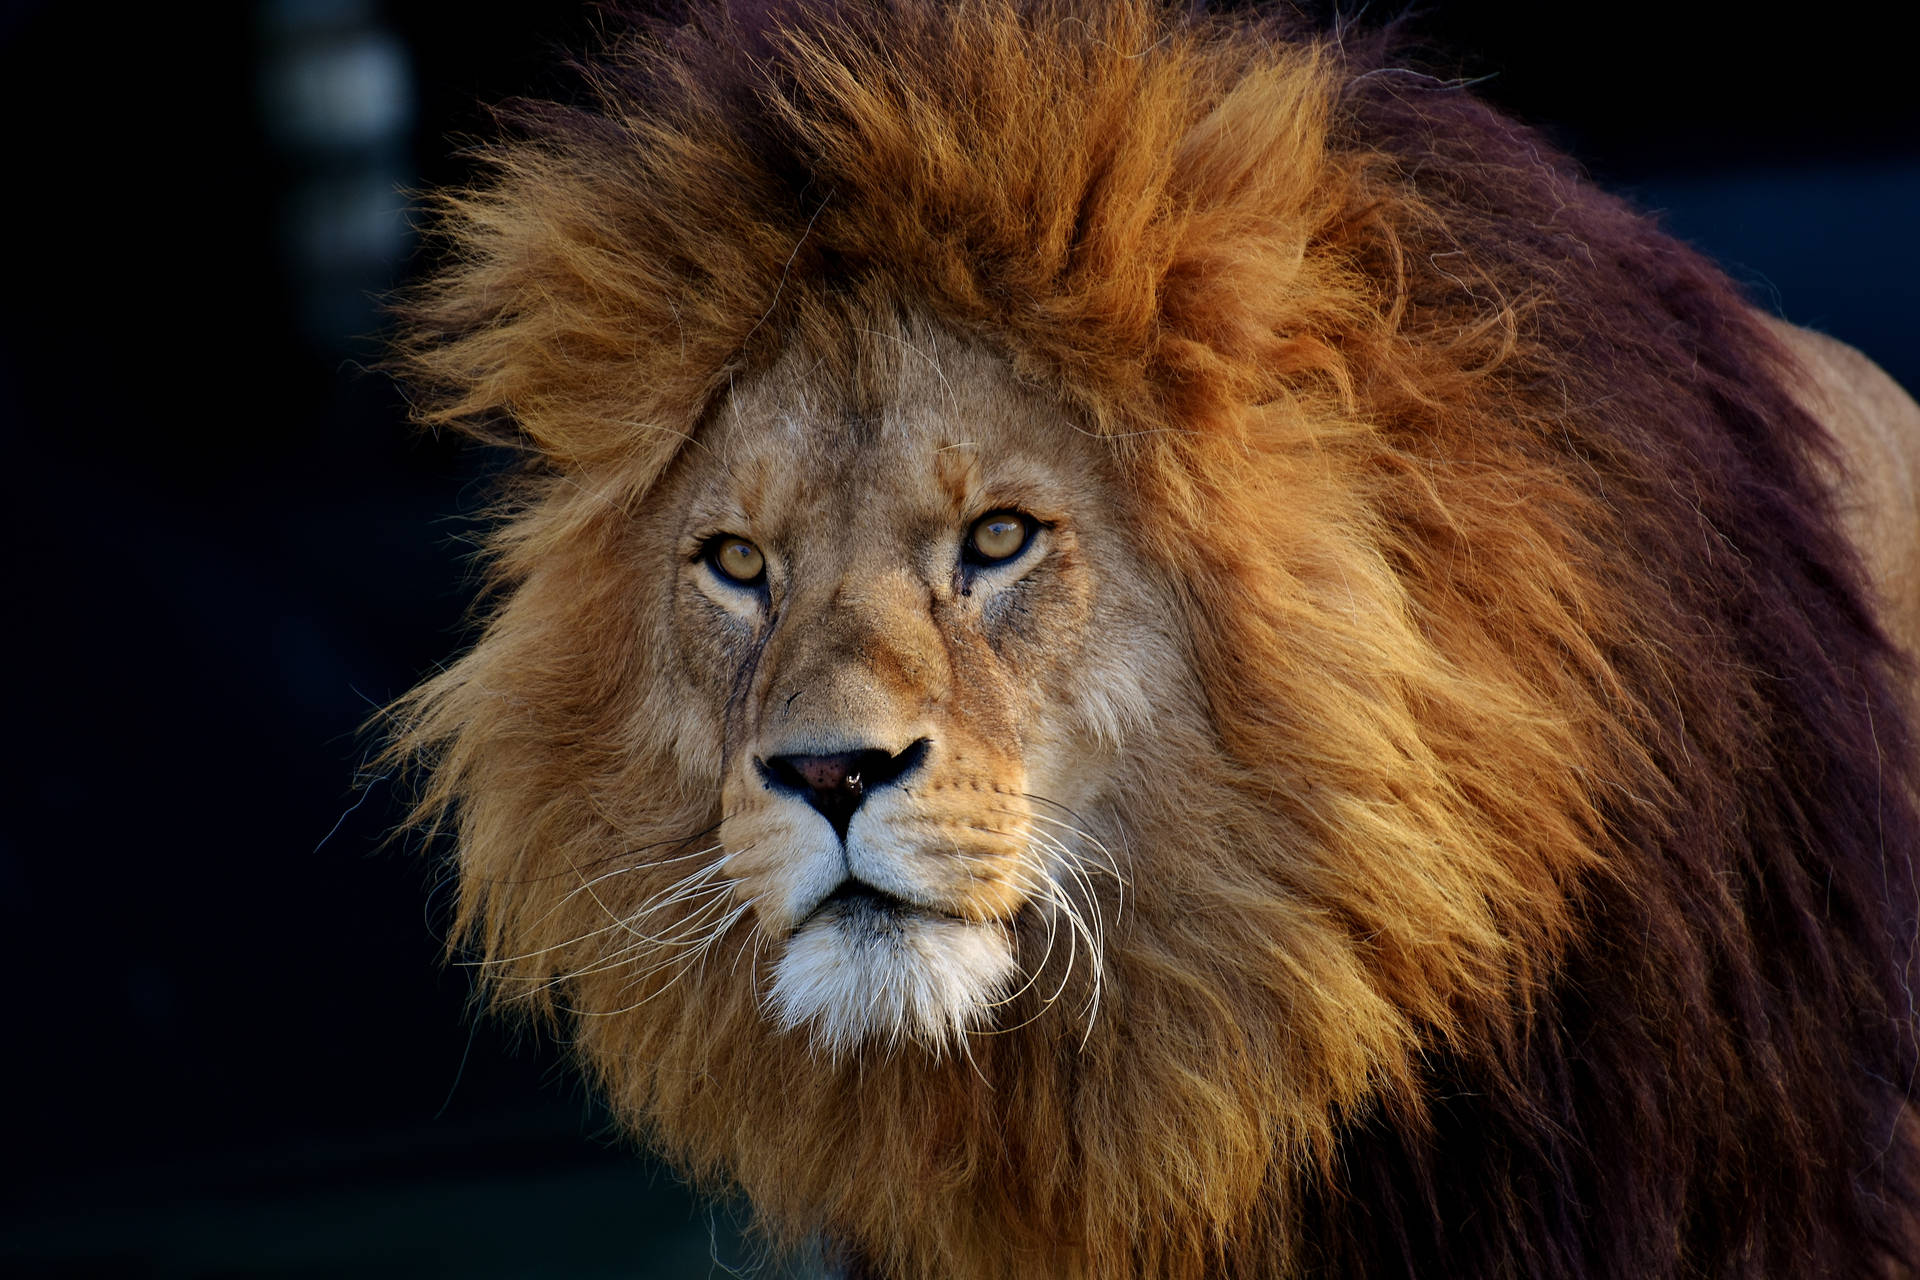 Nature's King - A Majestic Lion Background